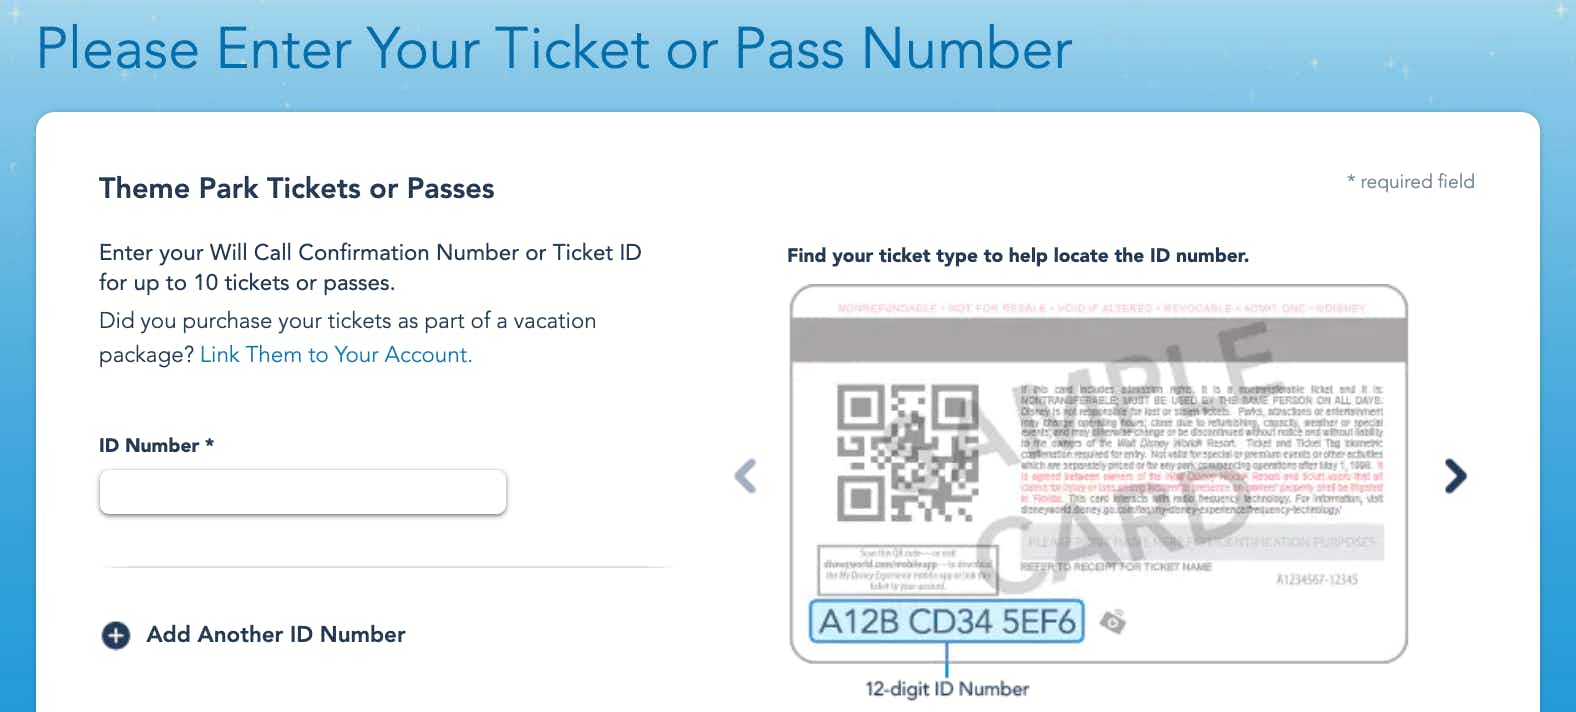 You have to link your Disney World tickets to a Park Pass reservation.